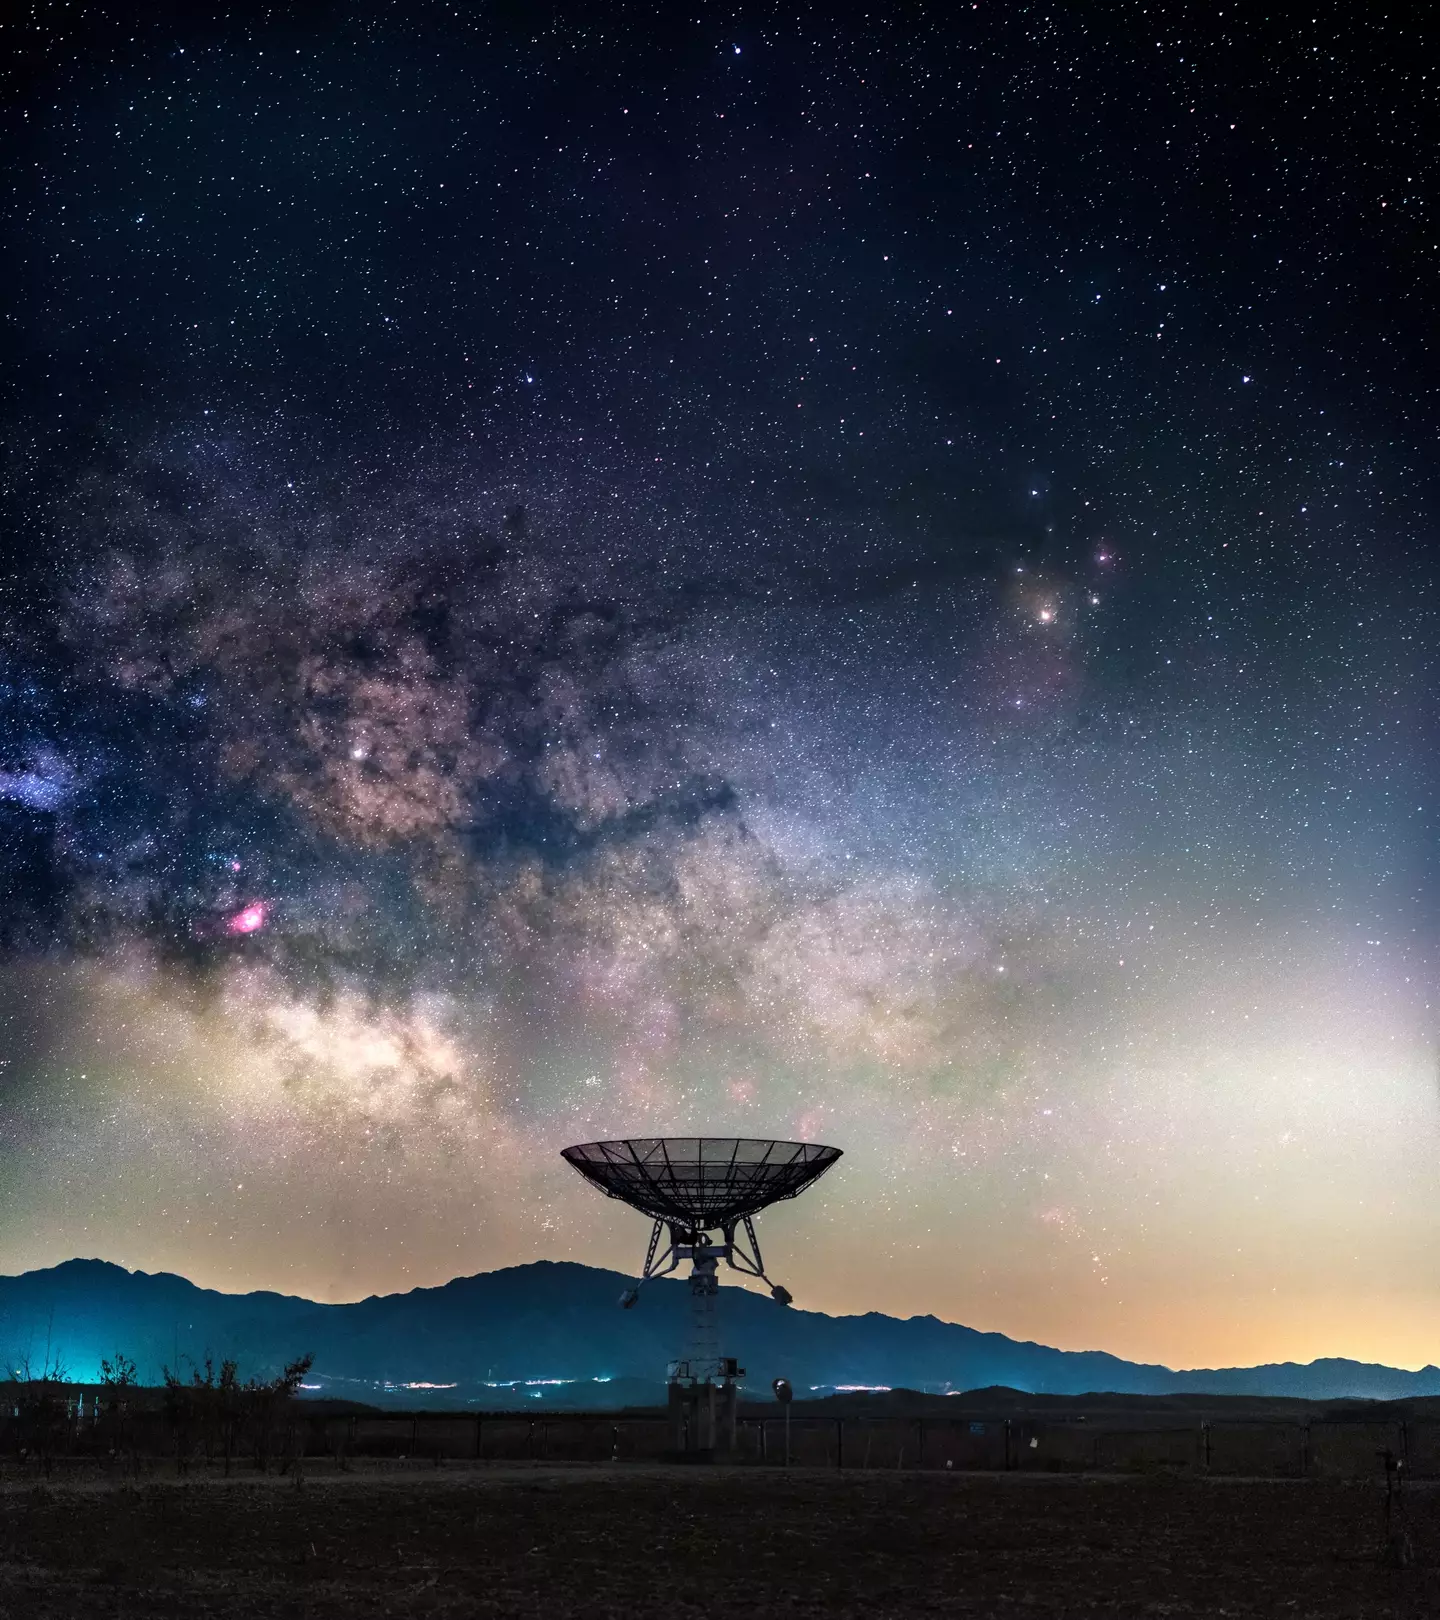 One NASA project hopes to send information back to Earth from millions of lightyears away.